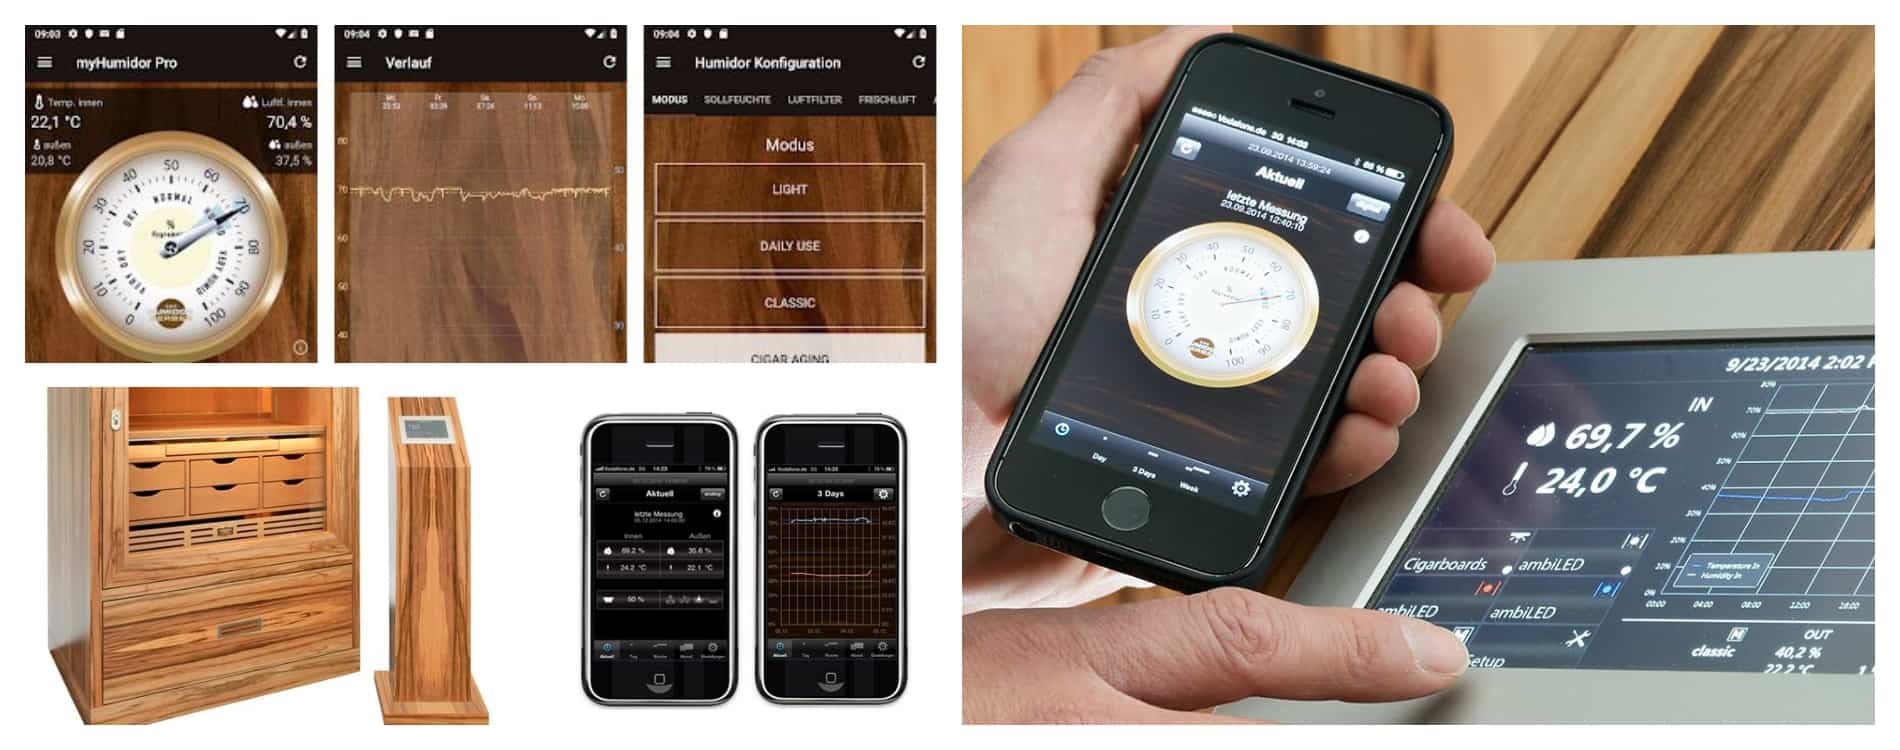 new app for your smart phone controlling the humidor